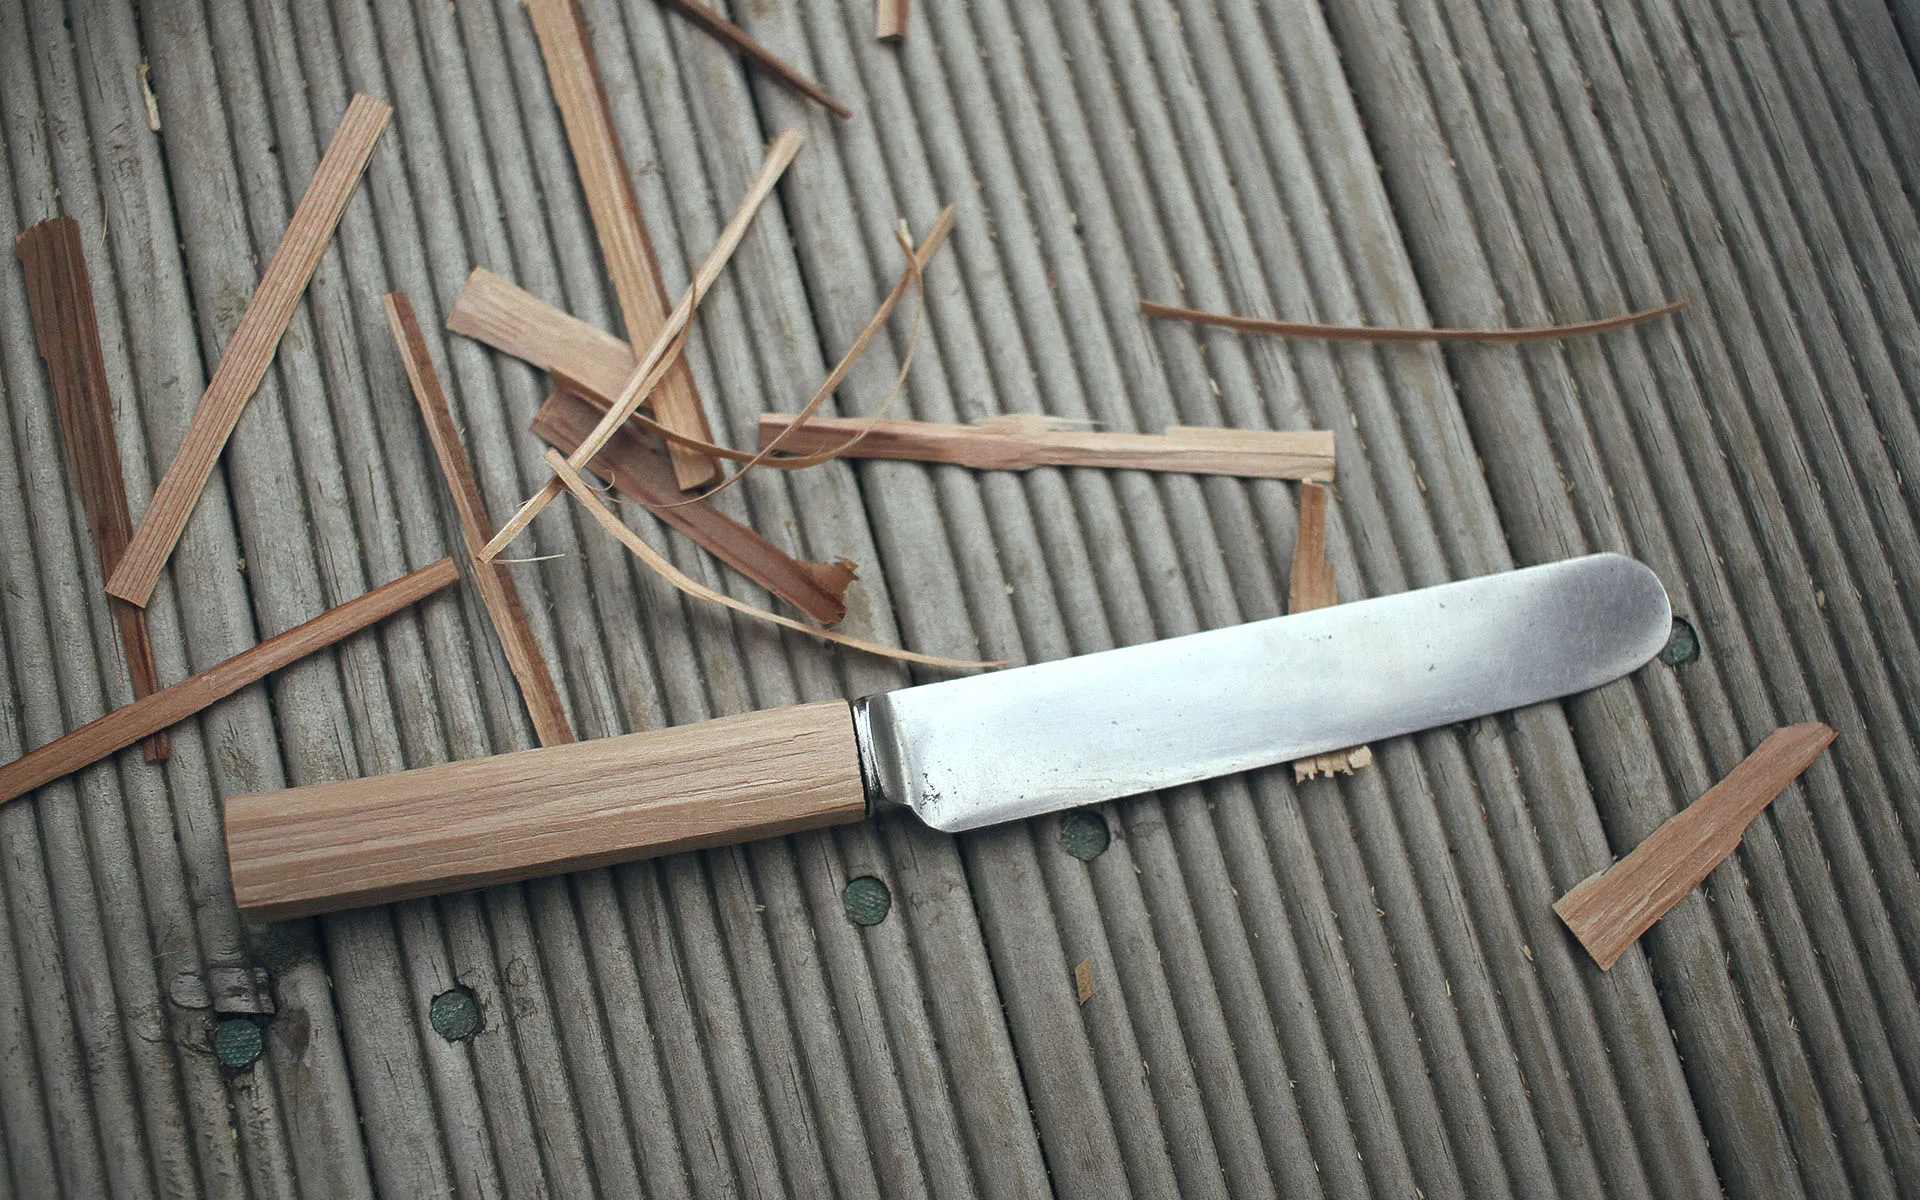 Knife with a rough cut of a new handle on a wooden surface with wood chips next to it.